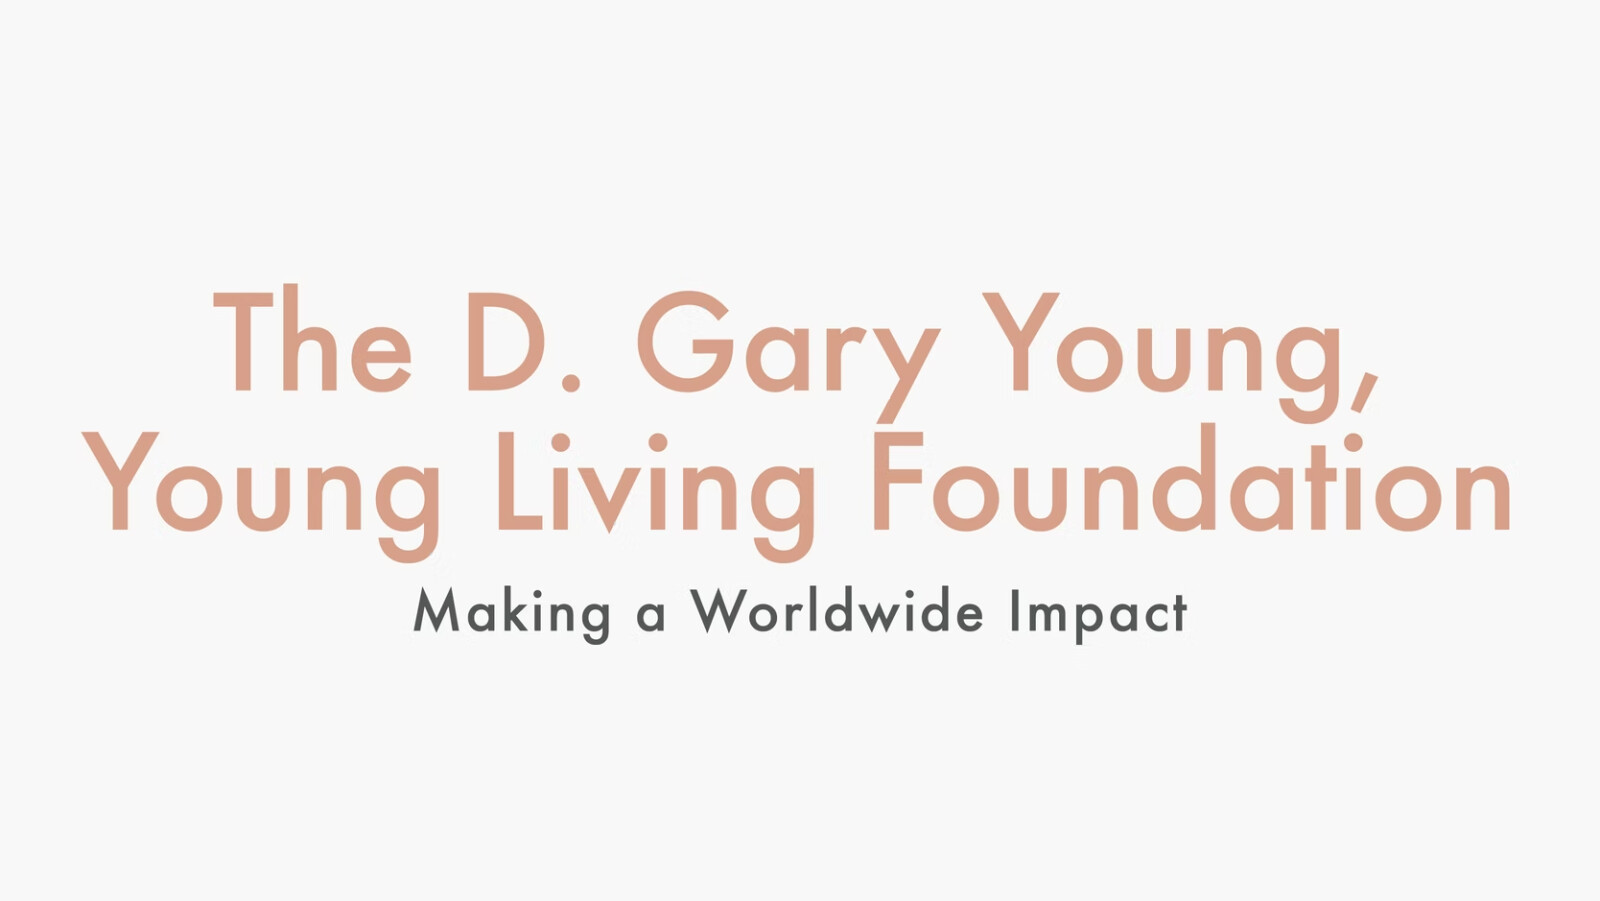 Make a Worldwide Impact with the D. Gary Young, Young Living Foundation